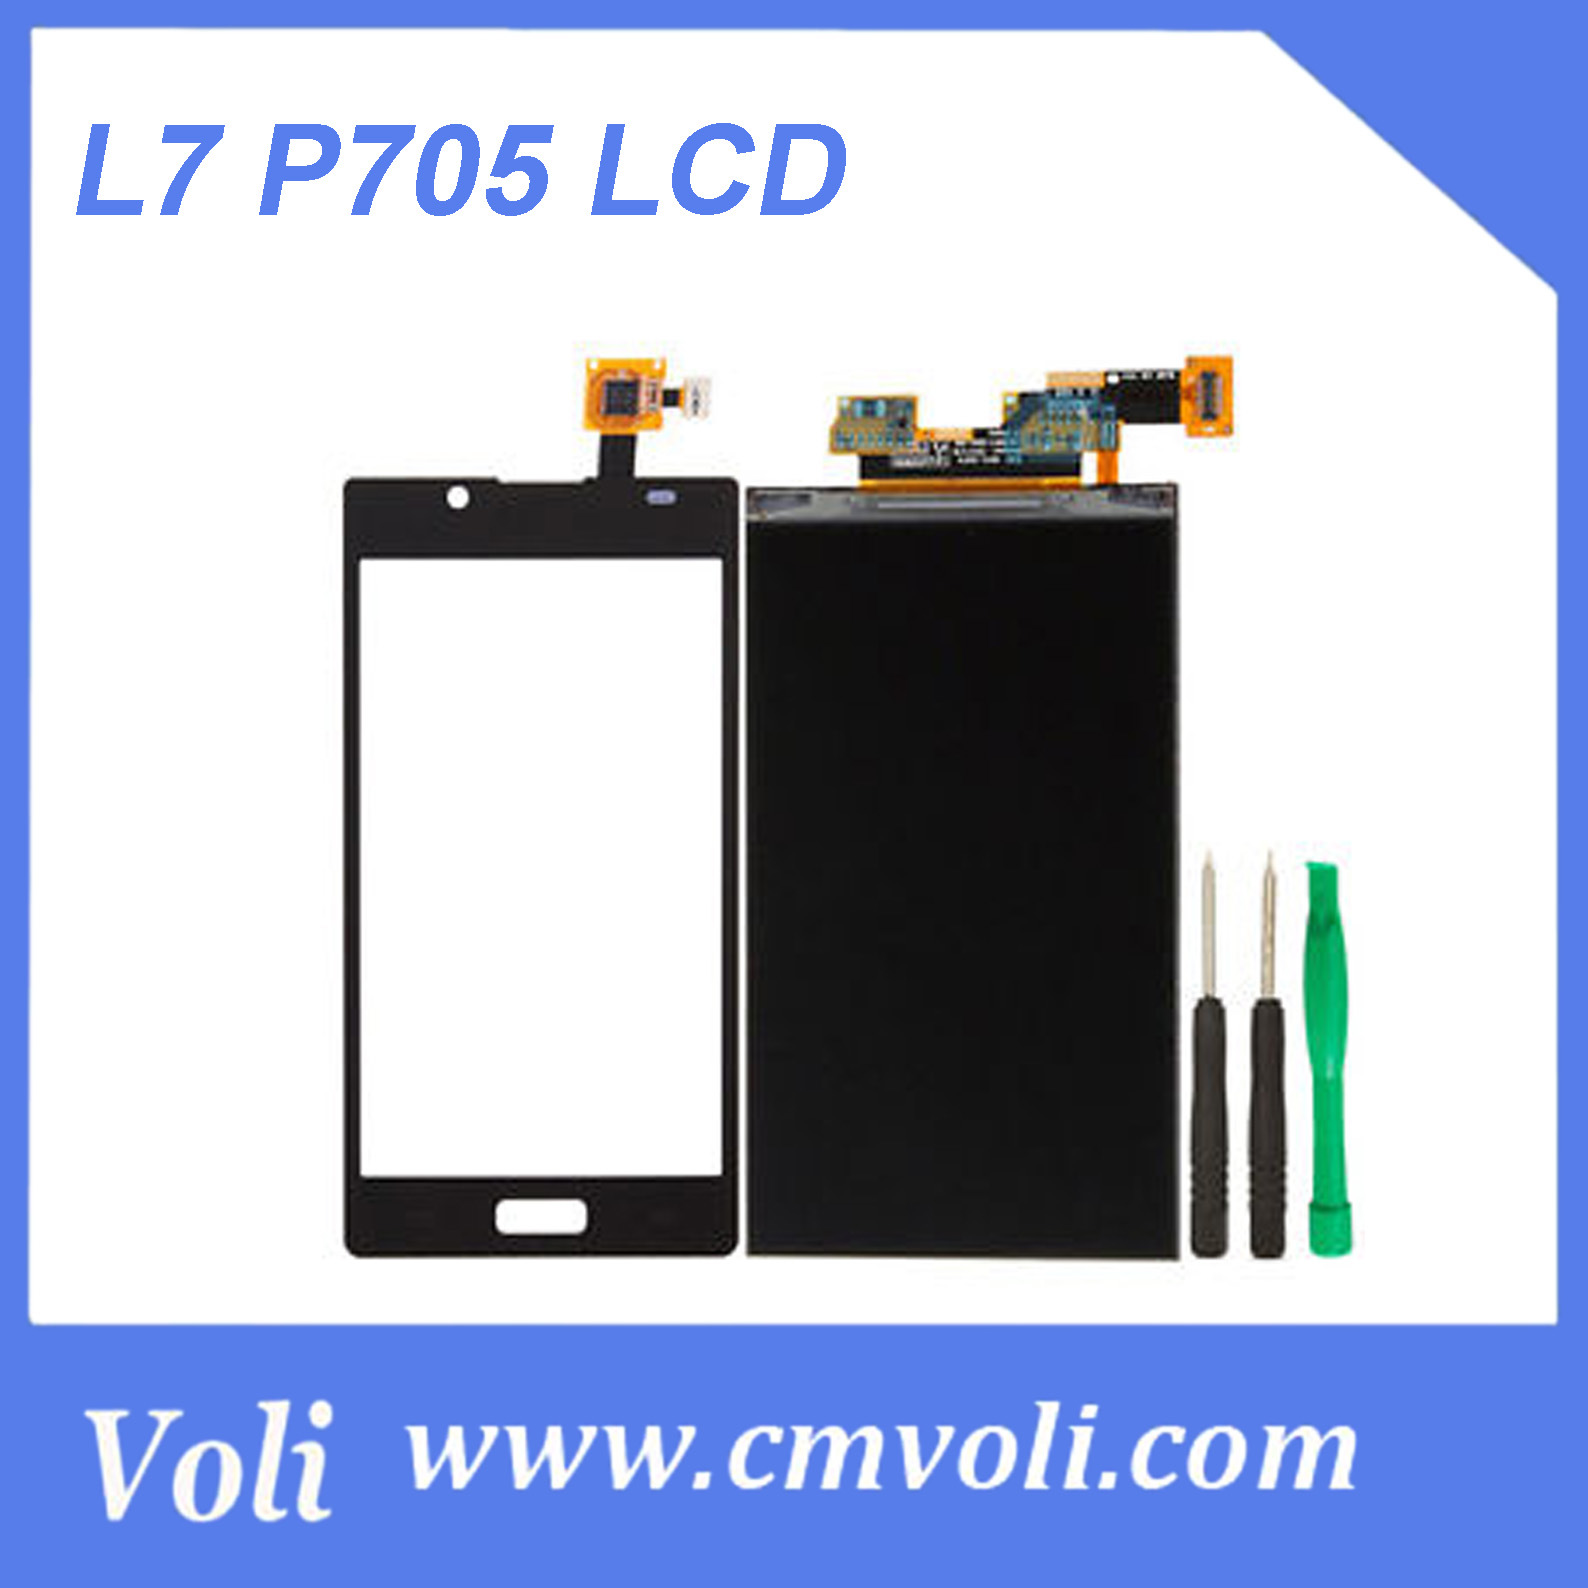 High Quality LCD Screen for LG P700 P705, LCD for LG Optimus L7 P705